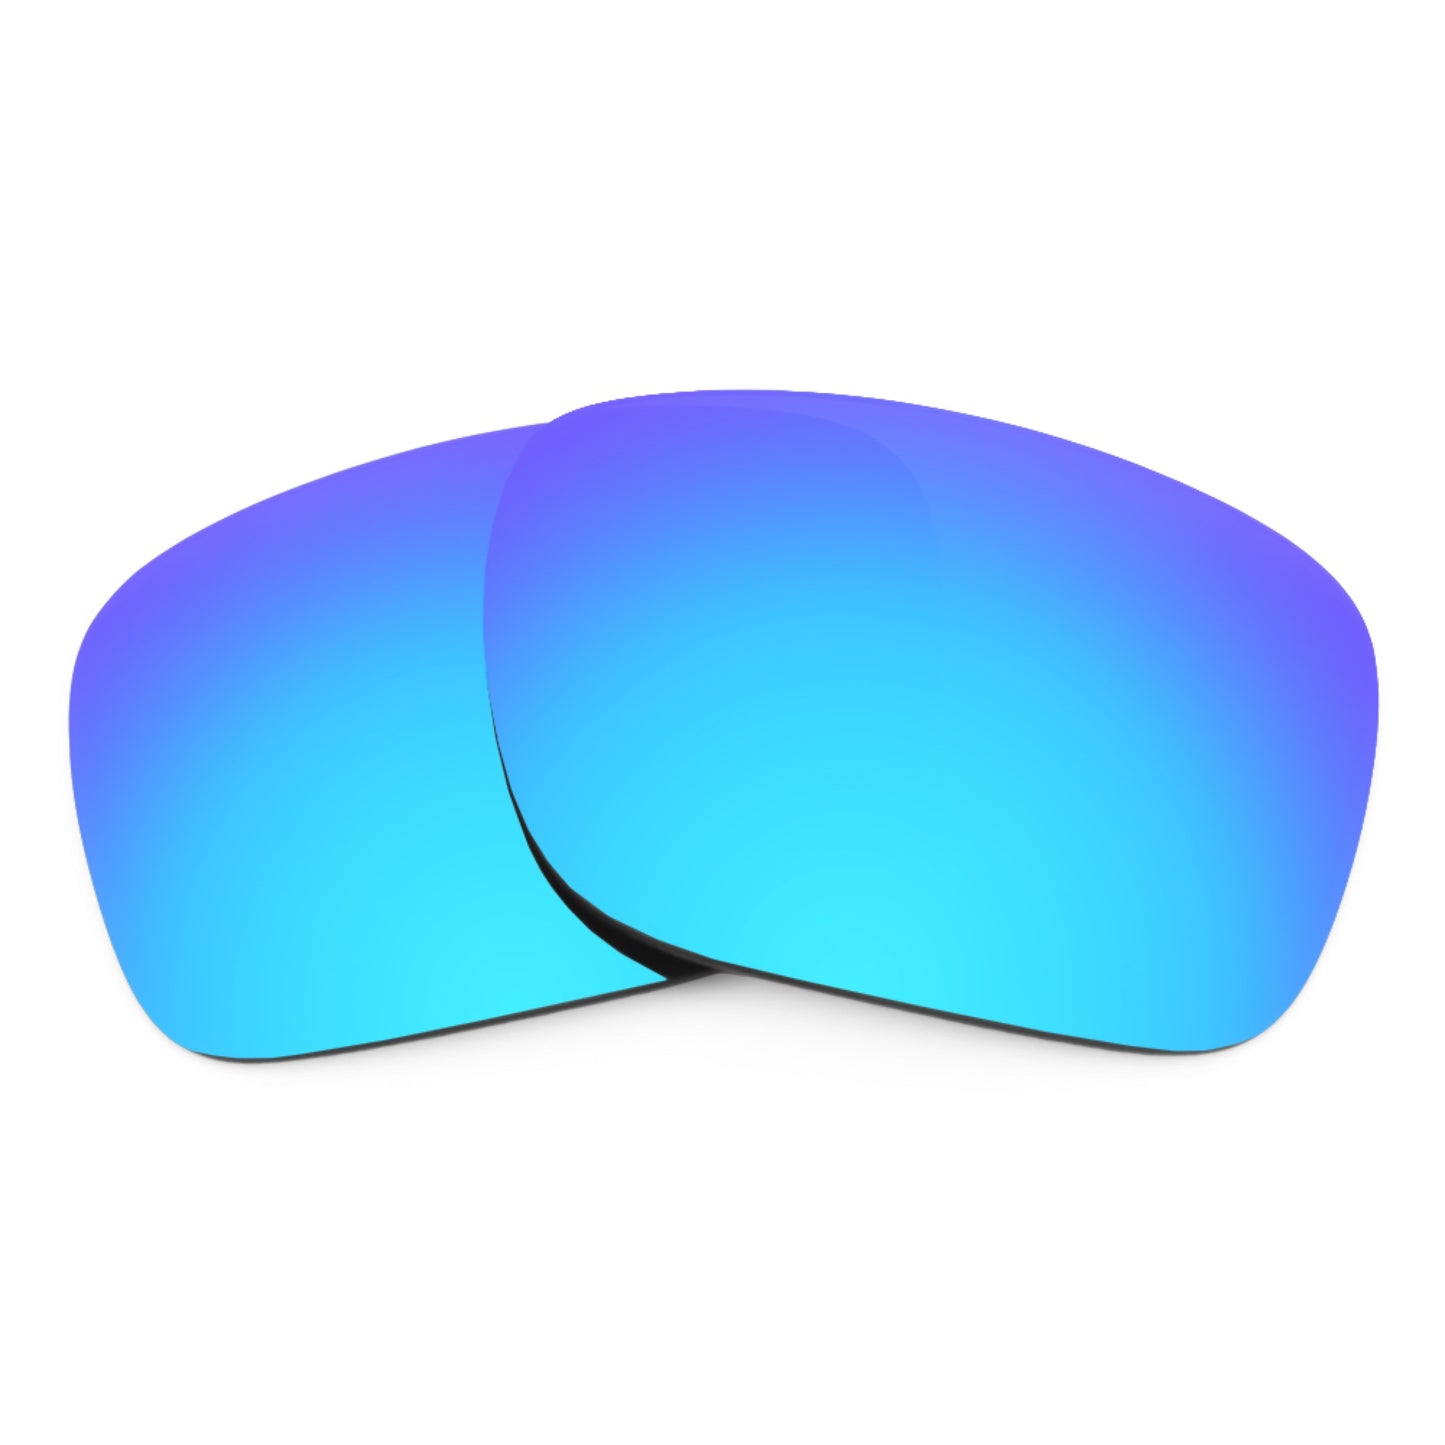 Revant replacement lenses for Ray-Ban Caravan RB3136 58mm Non-Polarized Ice Blue